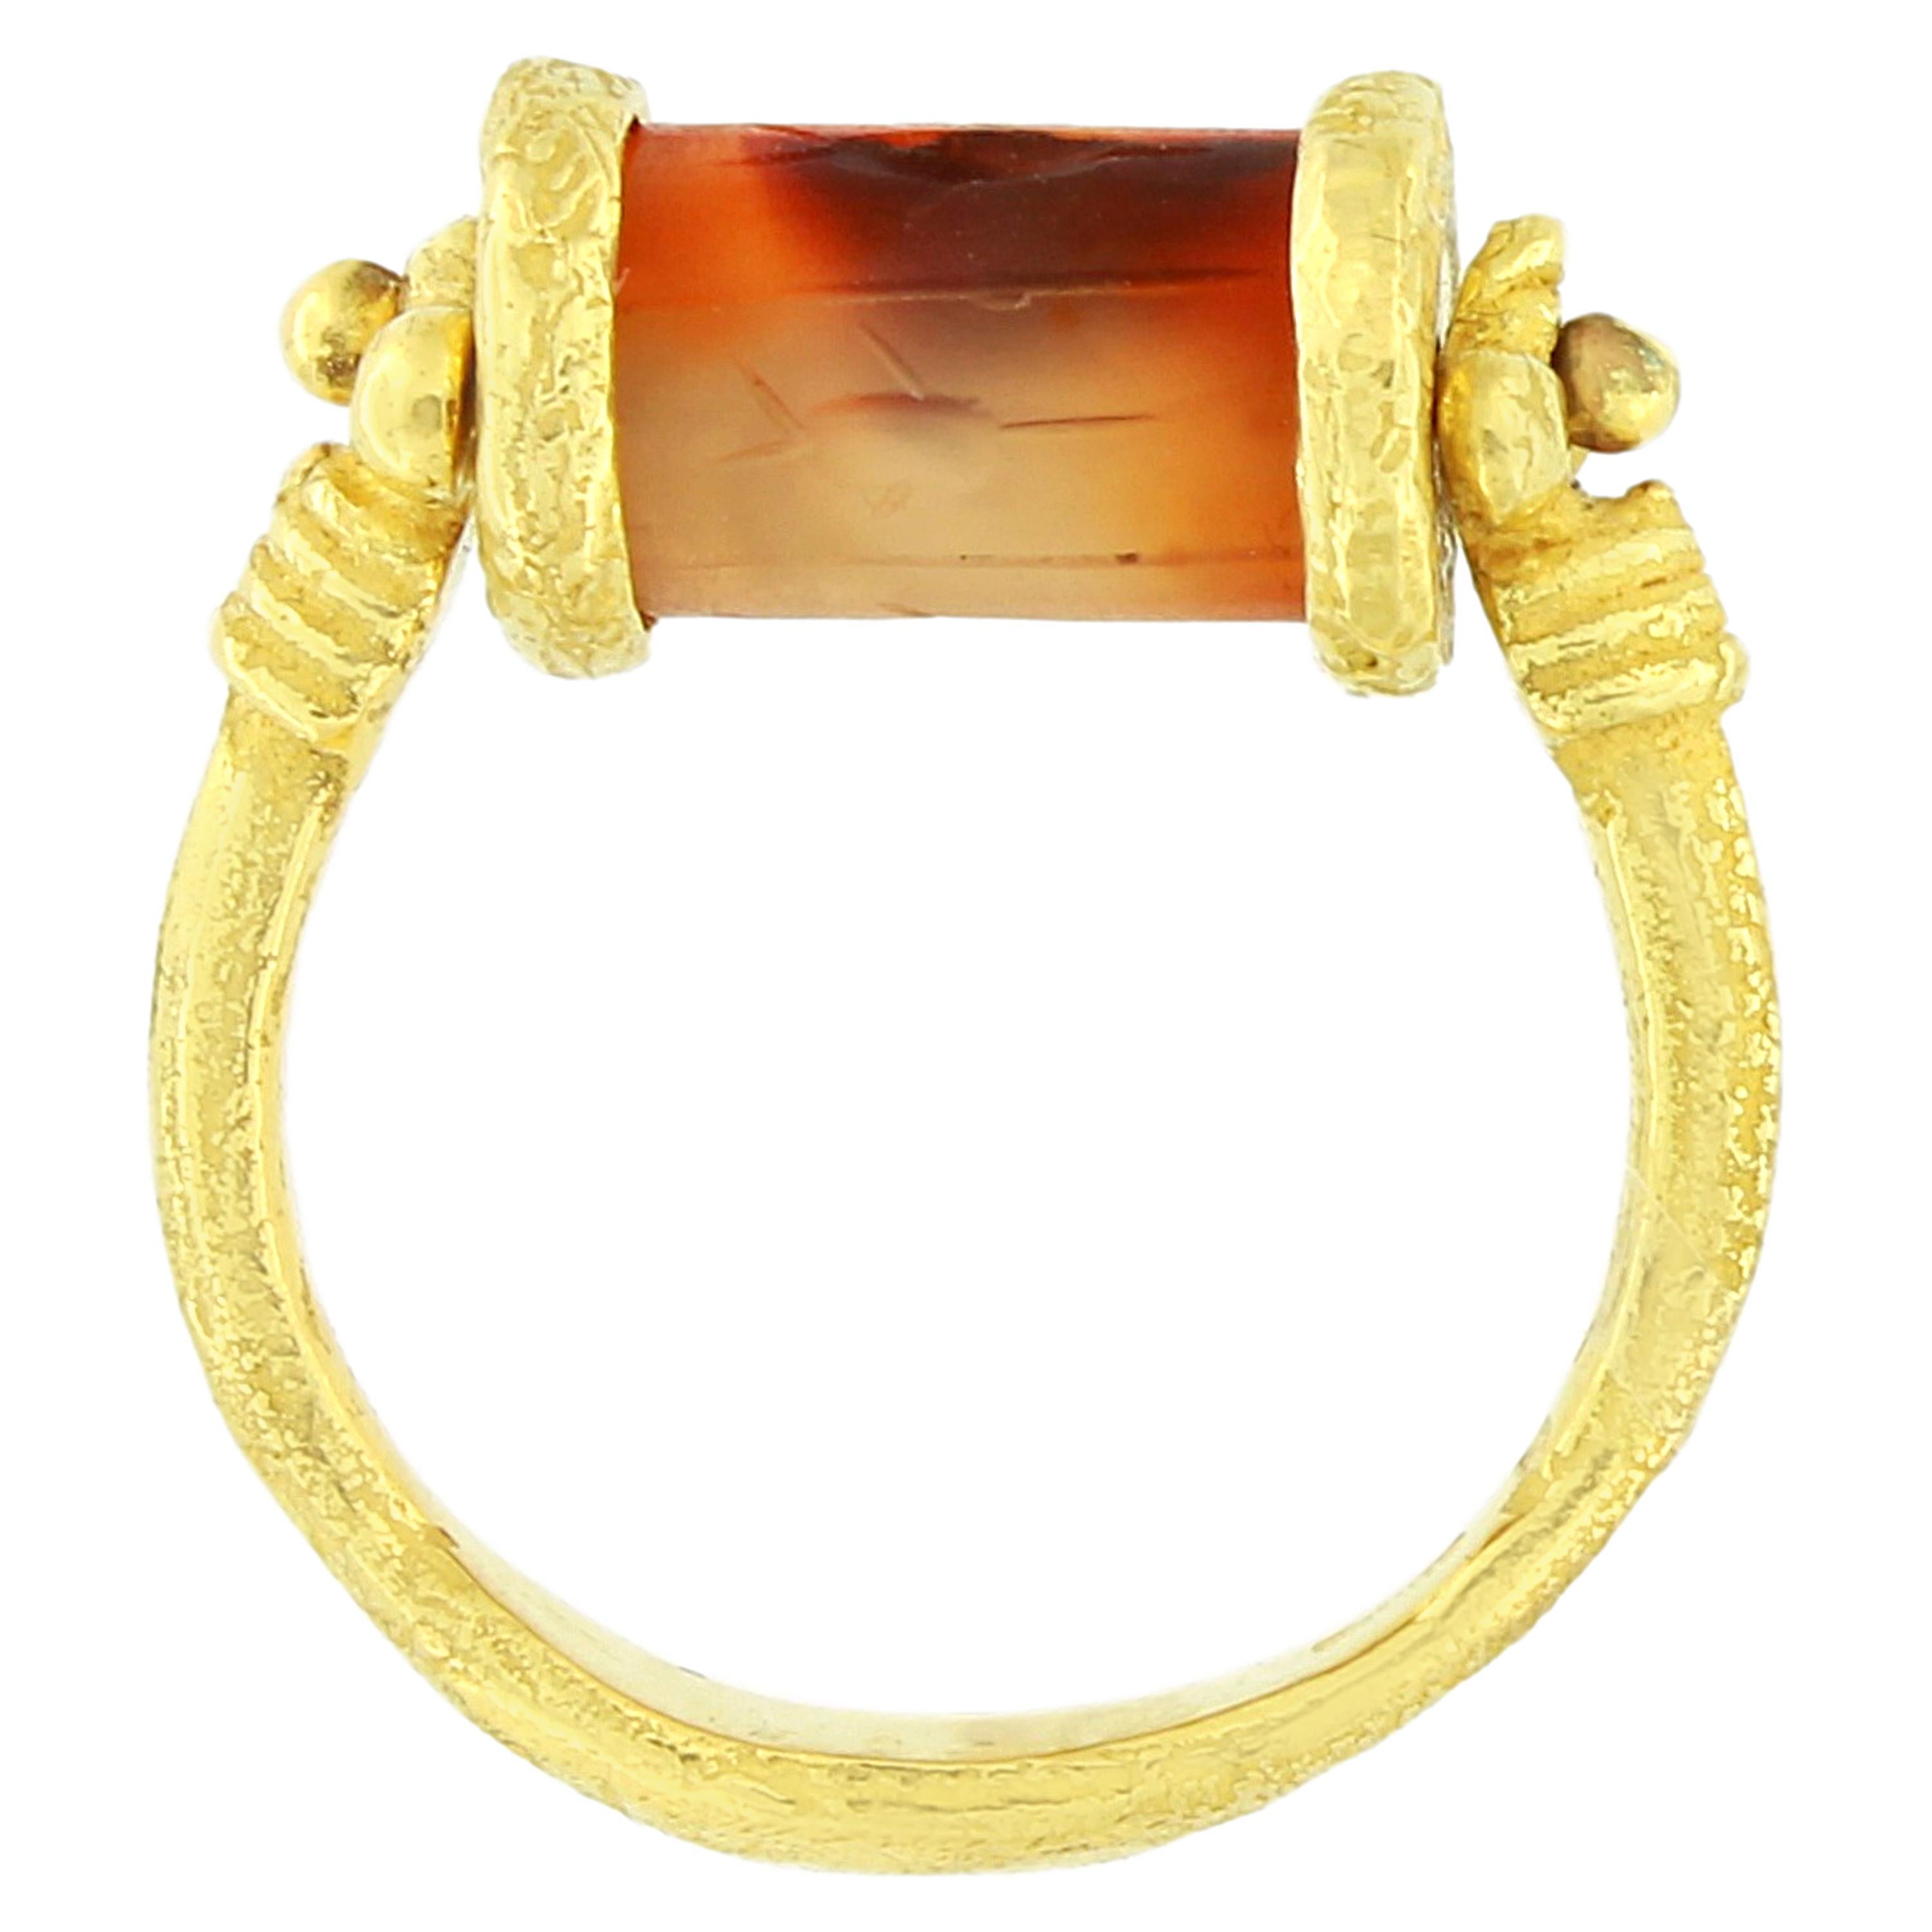 Gorgeous Engraved Carnelian Cylinder Seal Ring in Satin Yellow Gold, from Sacchi’s 